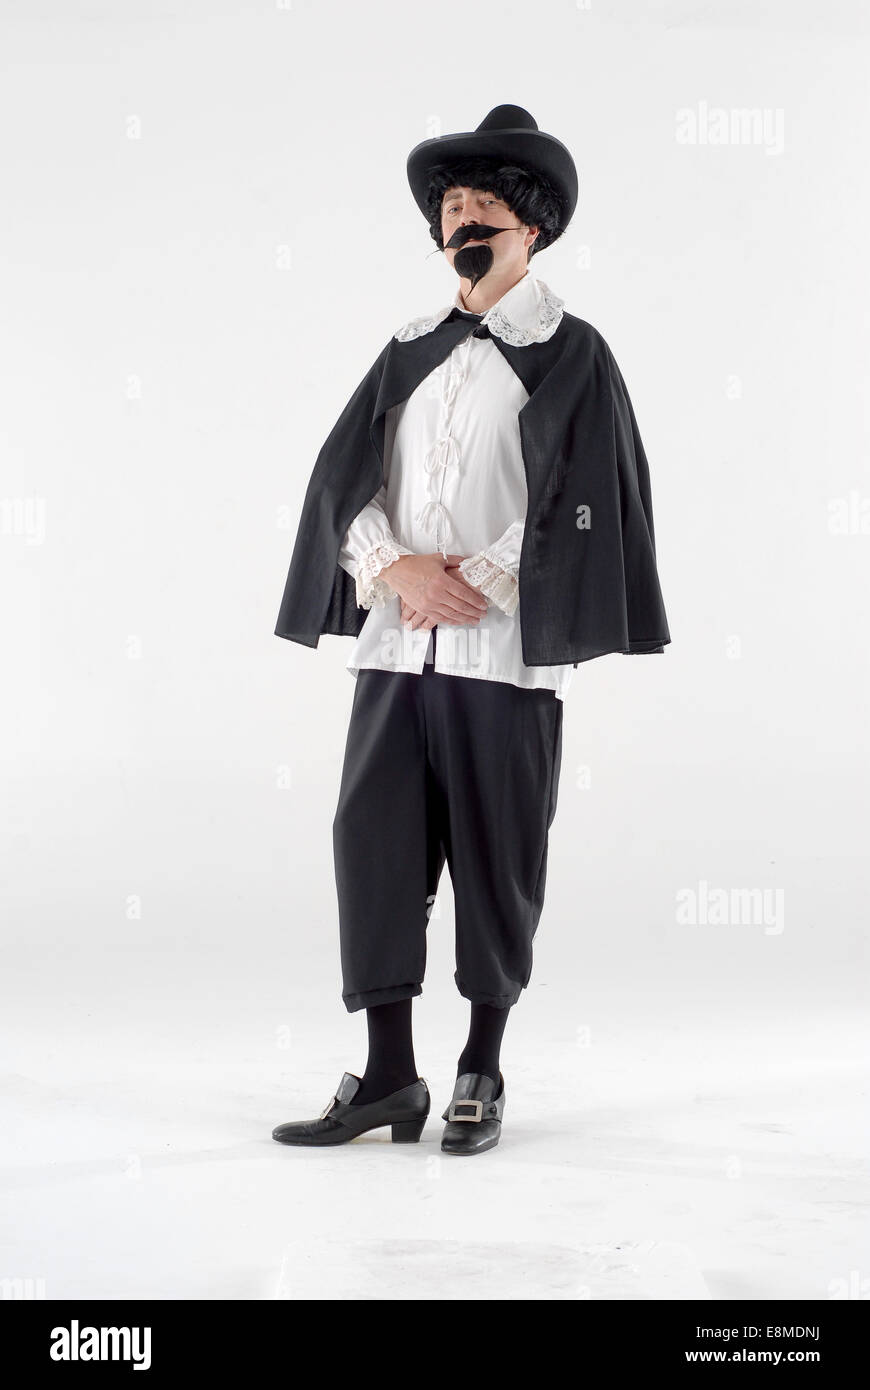 man in fancy dress comedy costume as historical figure kind of like a duchman / Rembrandt Stock Photo